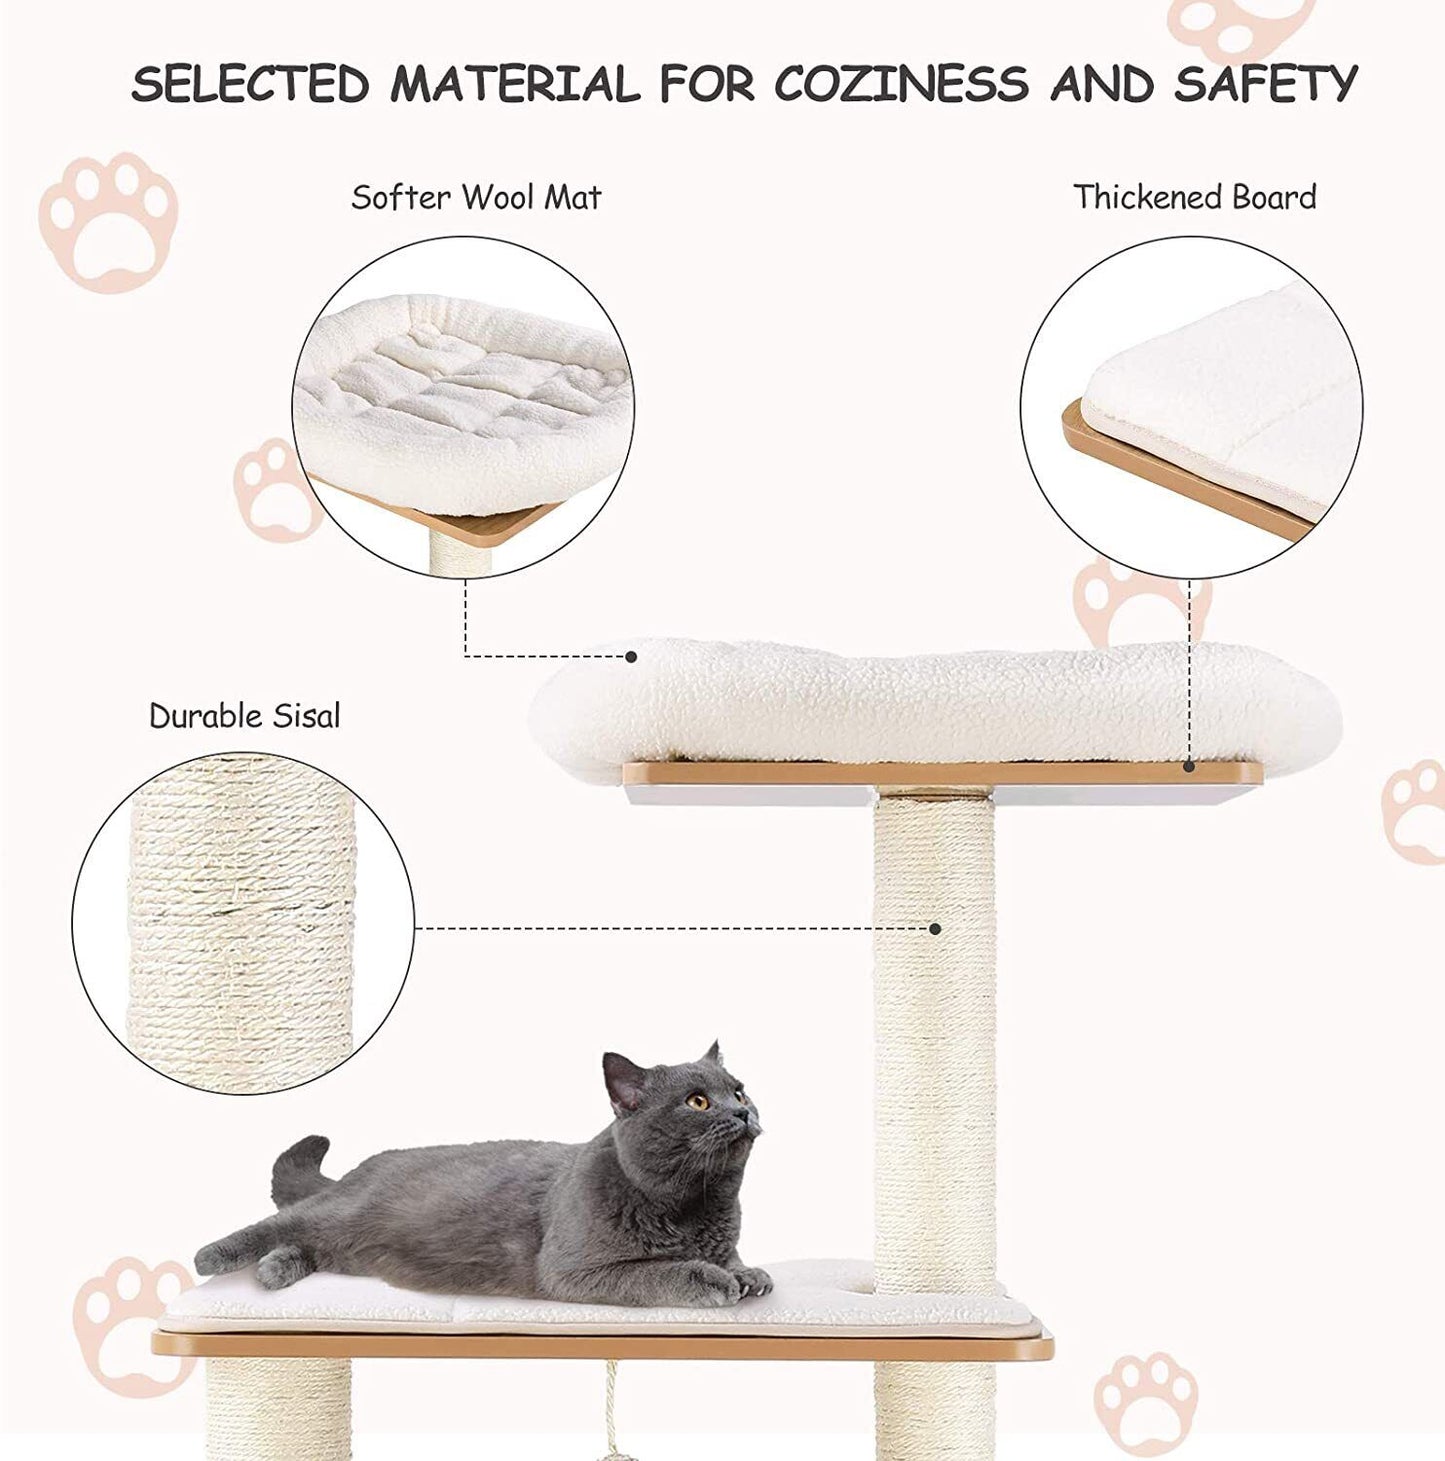 Arlopu 55'' Tall Modern Cat Tree Tower for Indoor Cats, Wooden Cat Climbing Stand Furniture, 6 Level Platform Cat Activities Condo House with Scratch Post, Washable Mats & Top Perch, for Kittens & Large Cats